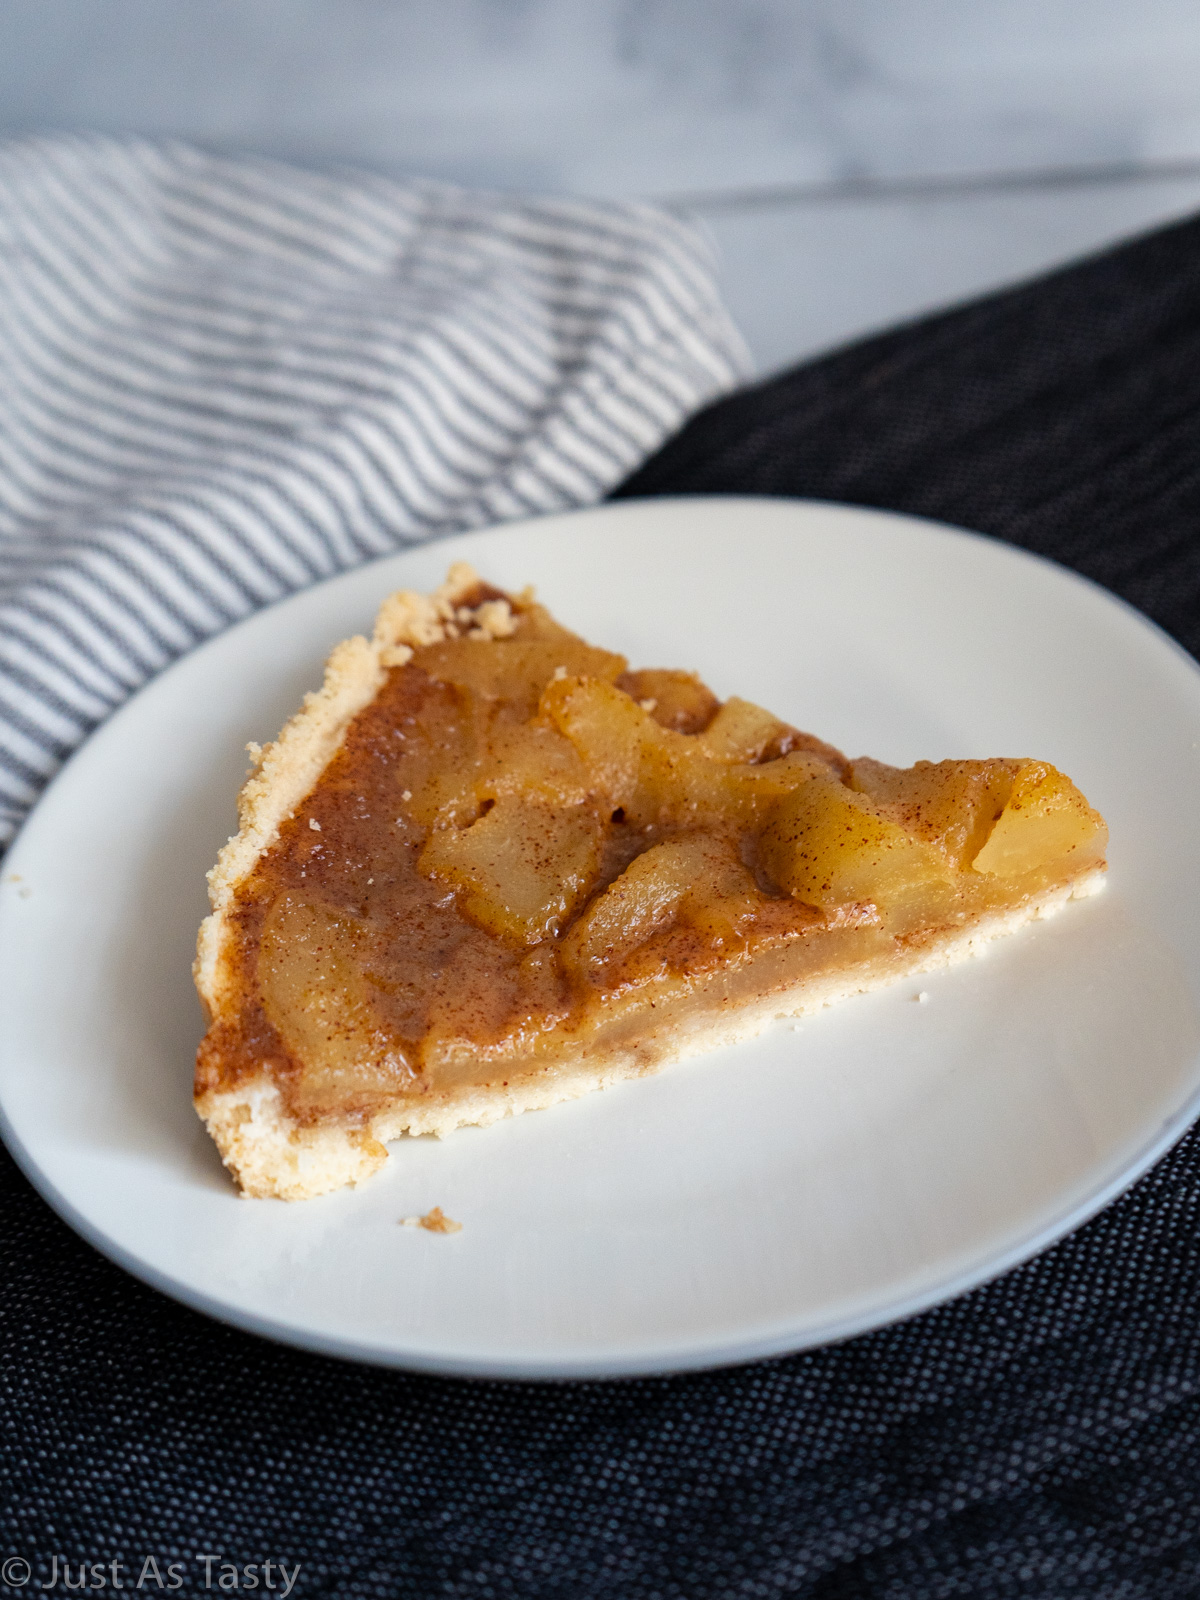 Slice of pear tart on a white plate.